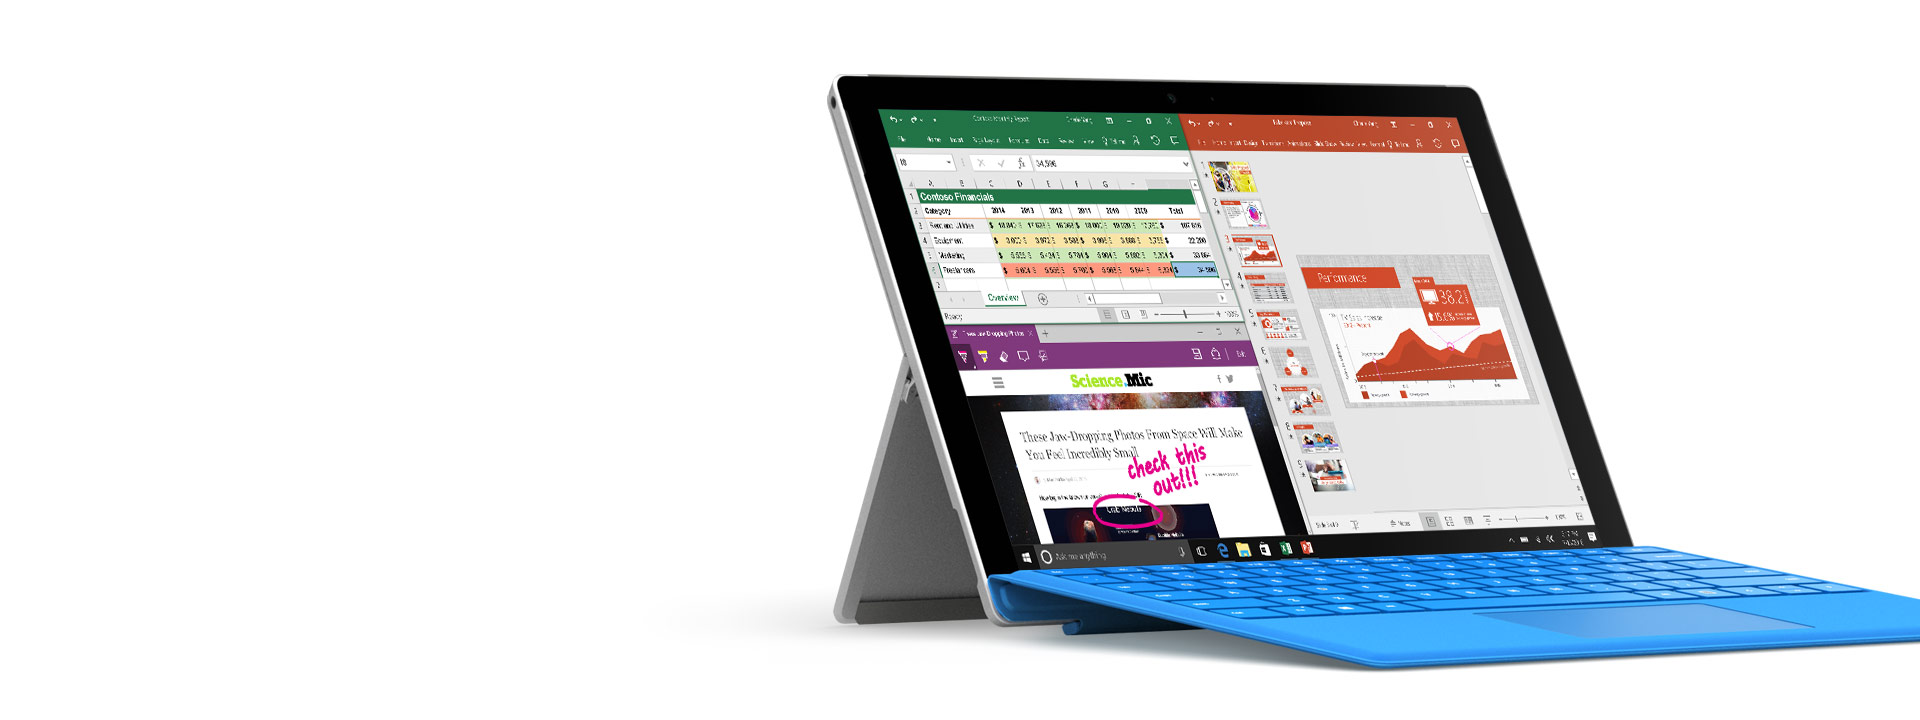 Surface Pro 4 with Office on screen